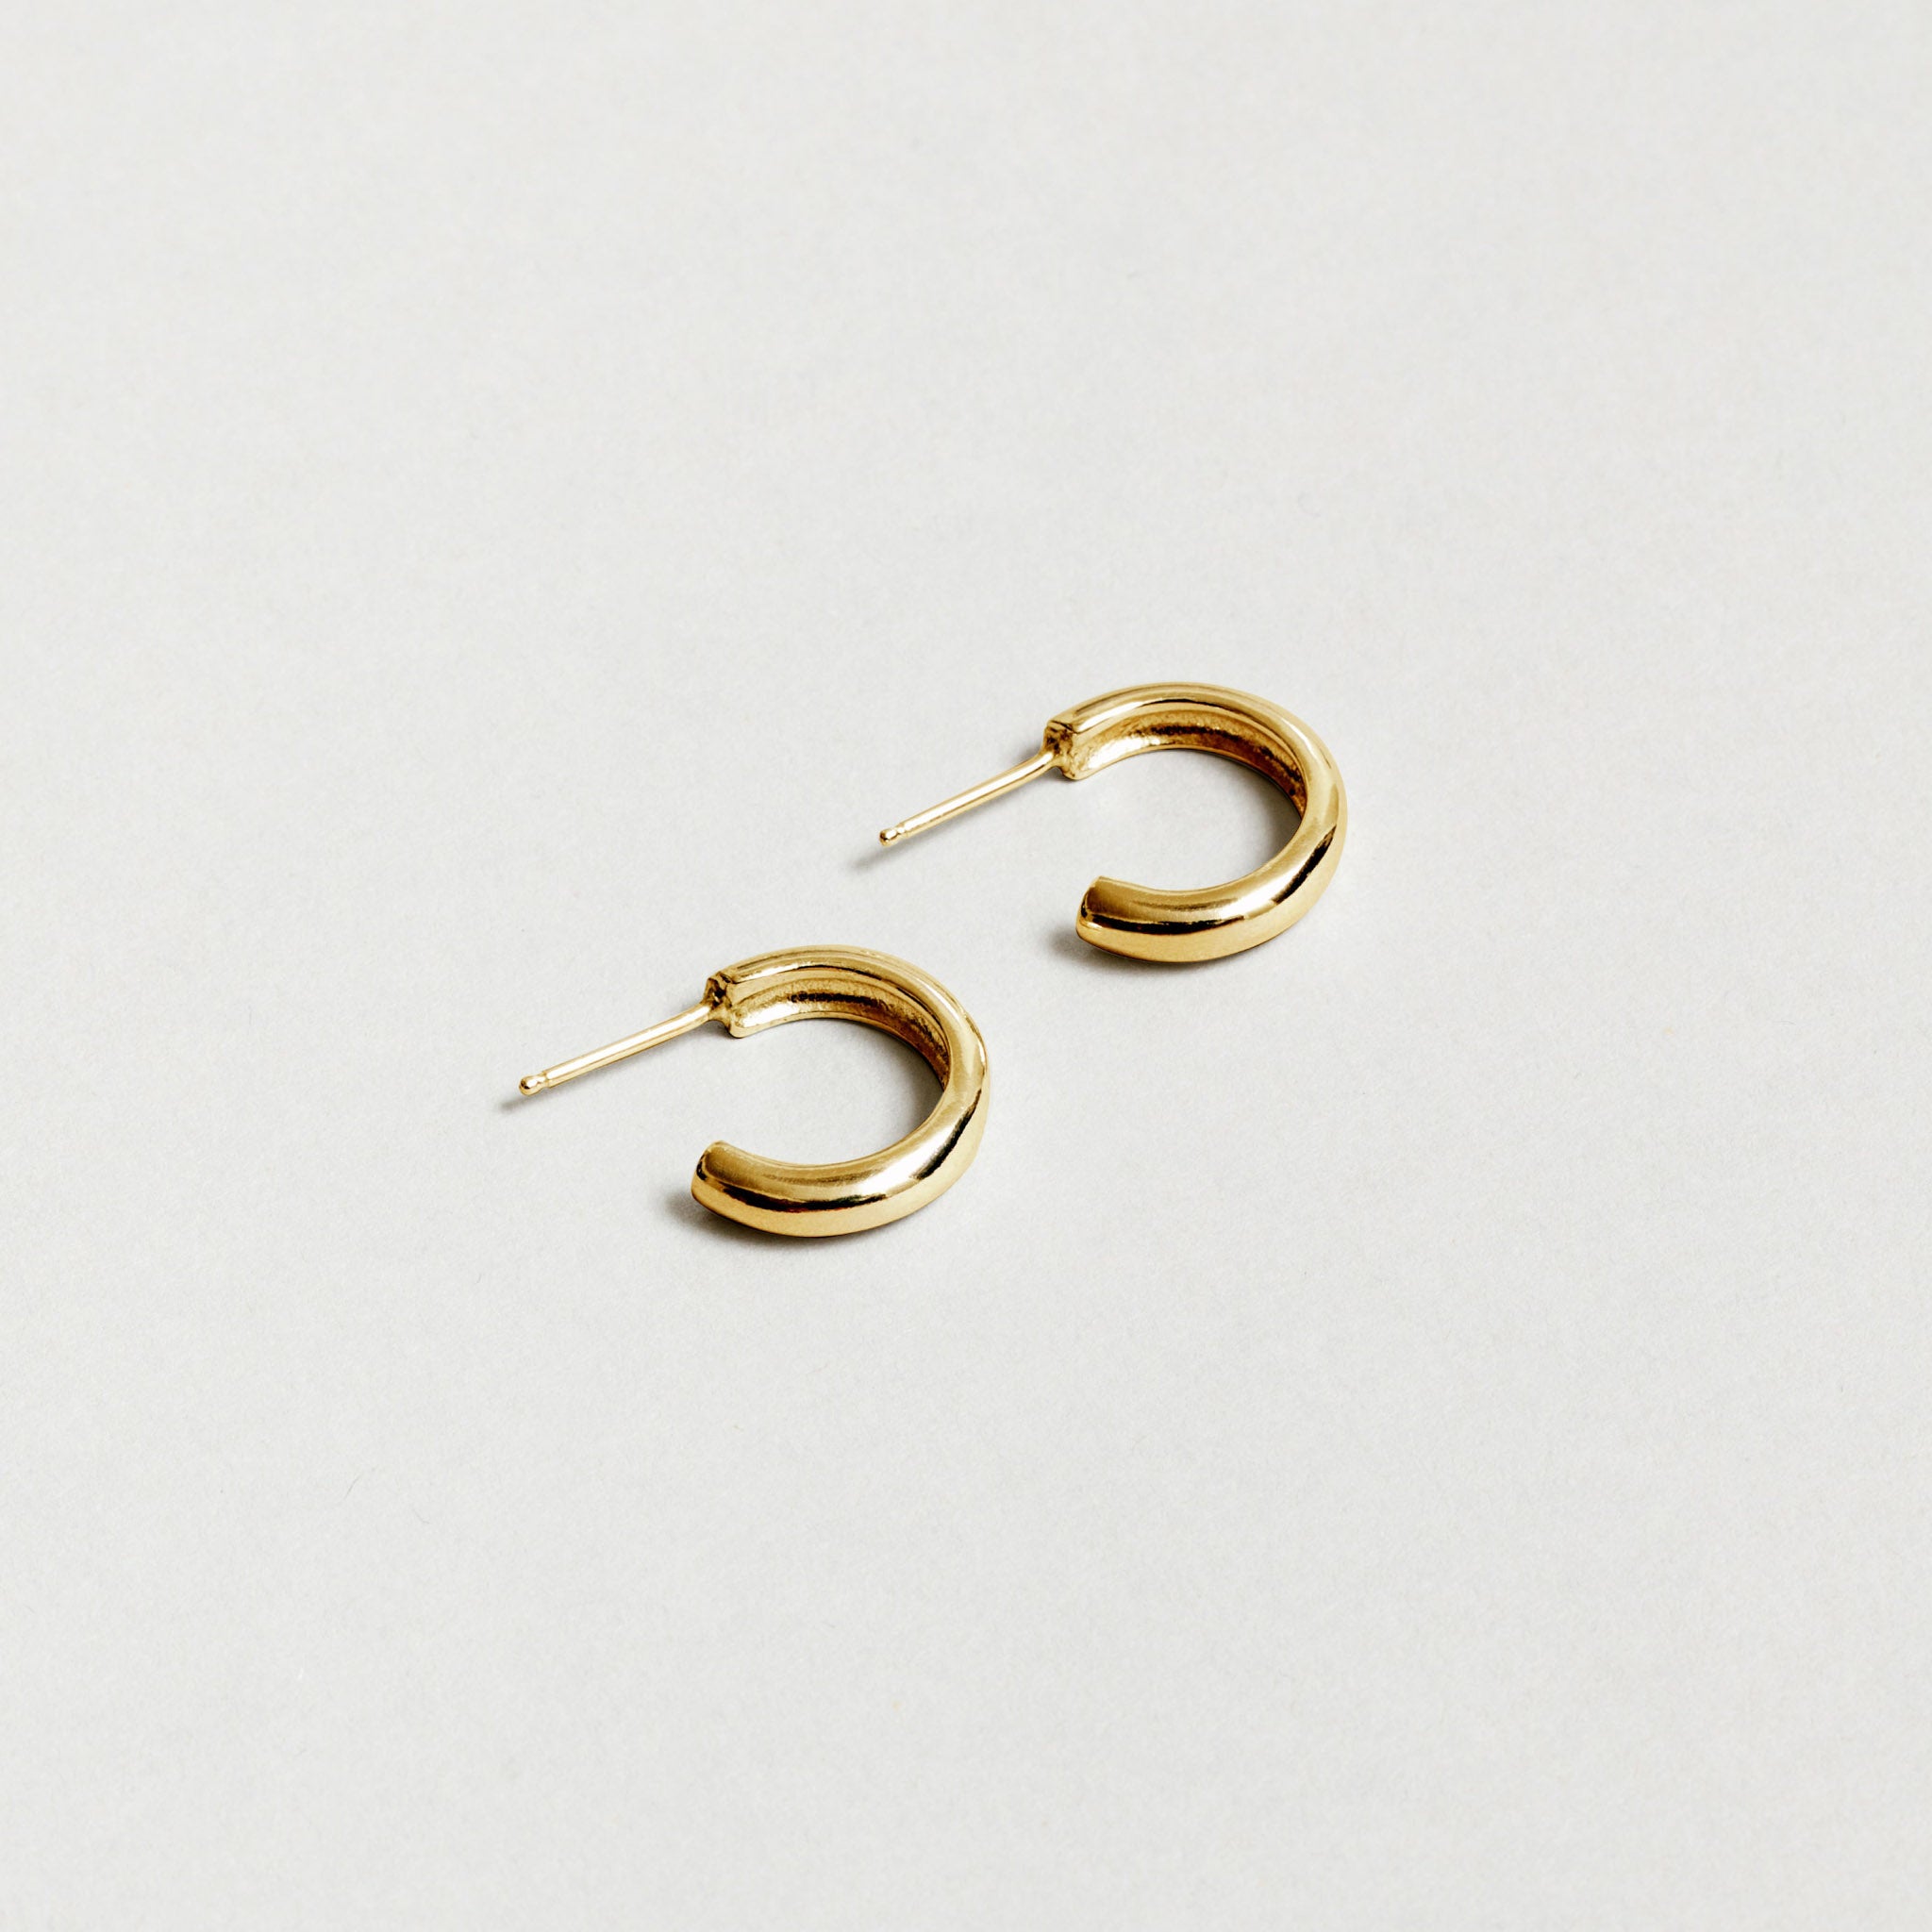 Small gold hoop earrings rest against a white background. 